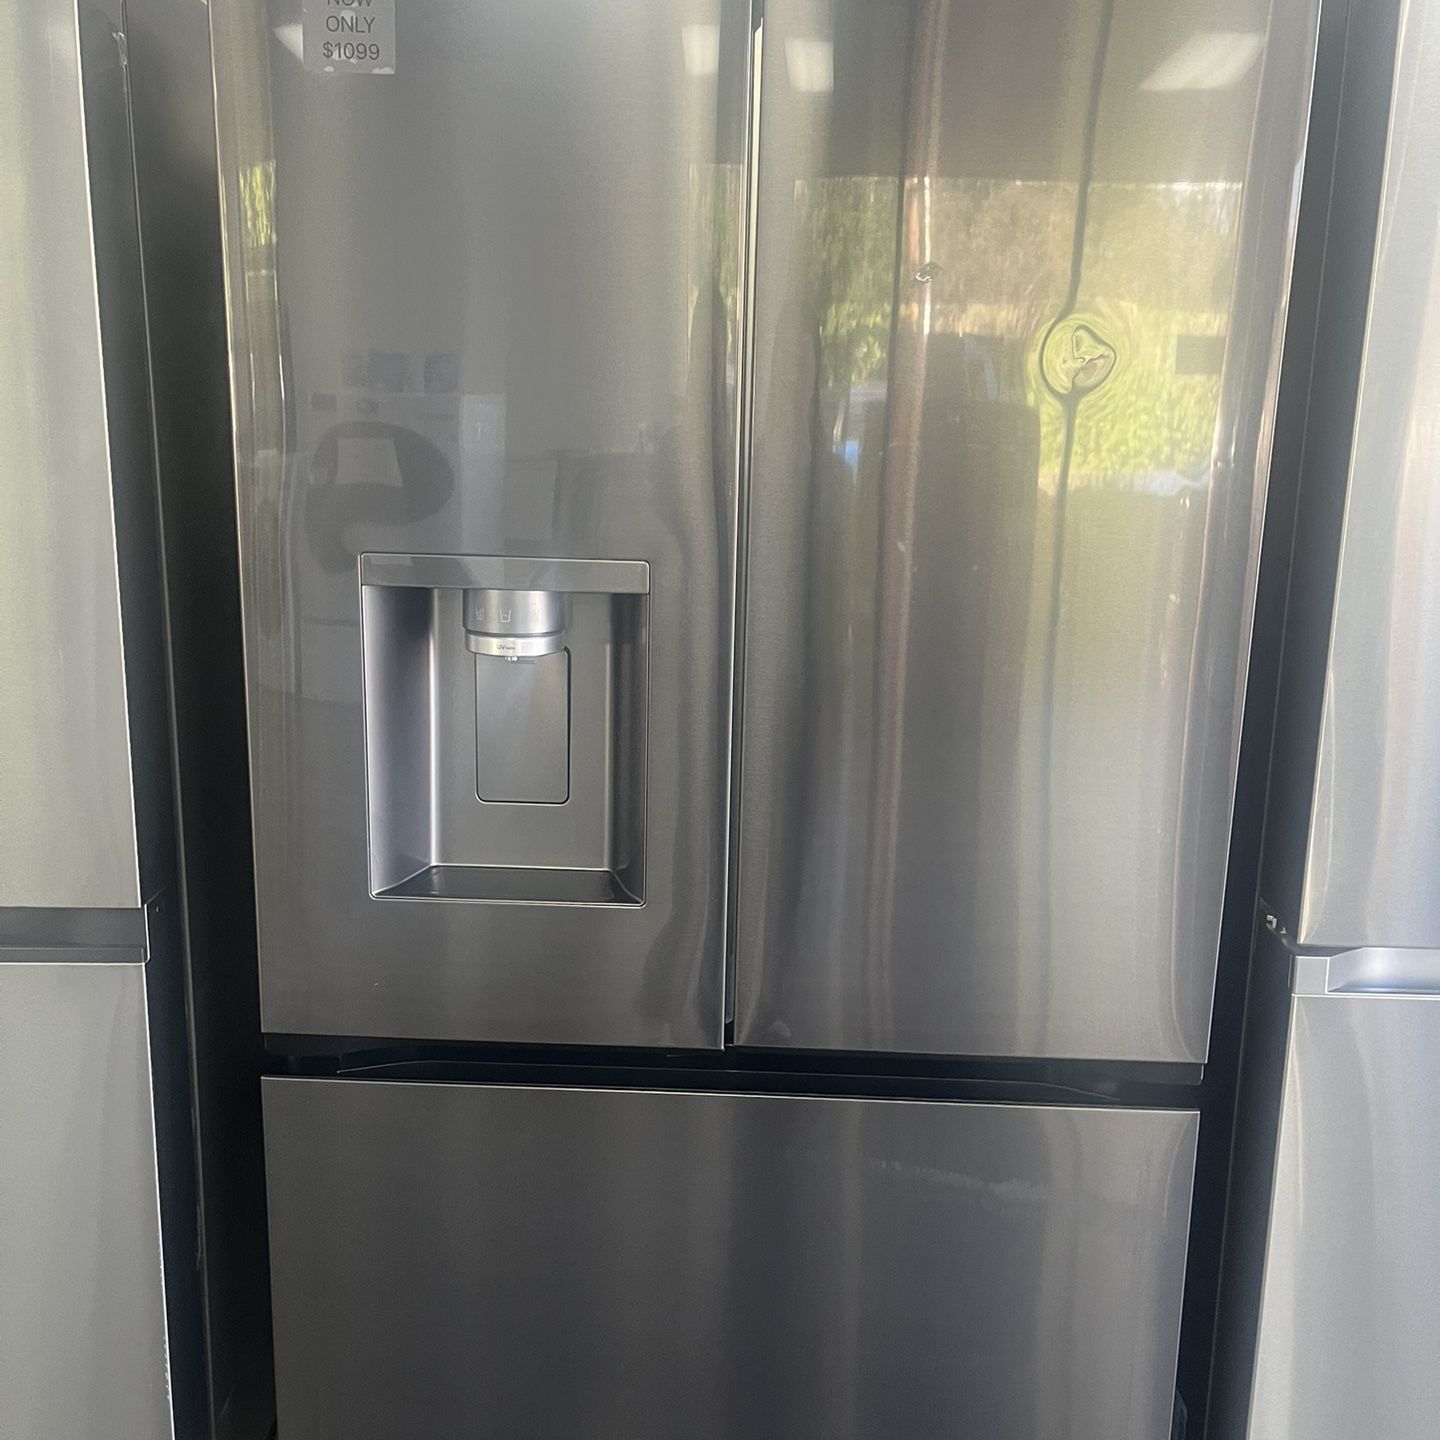 Limited Time! $1099 Open Box Black Stainless Steel Counter Depth Fridge Was$3299